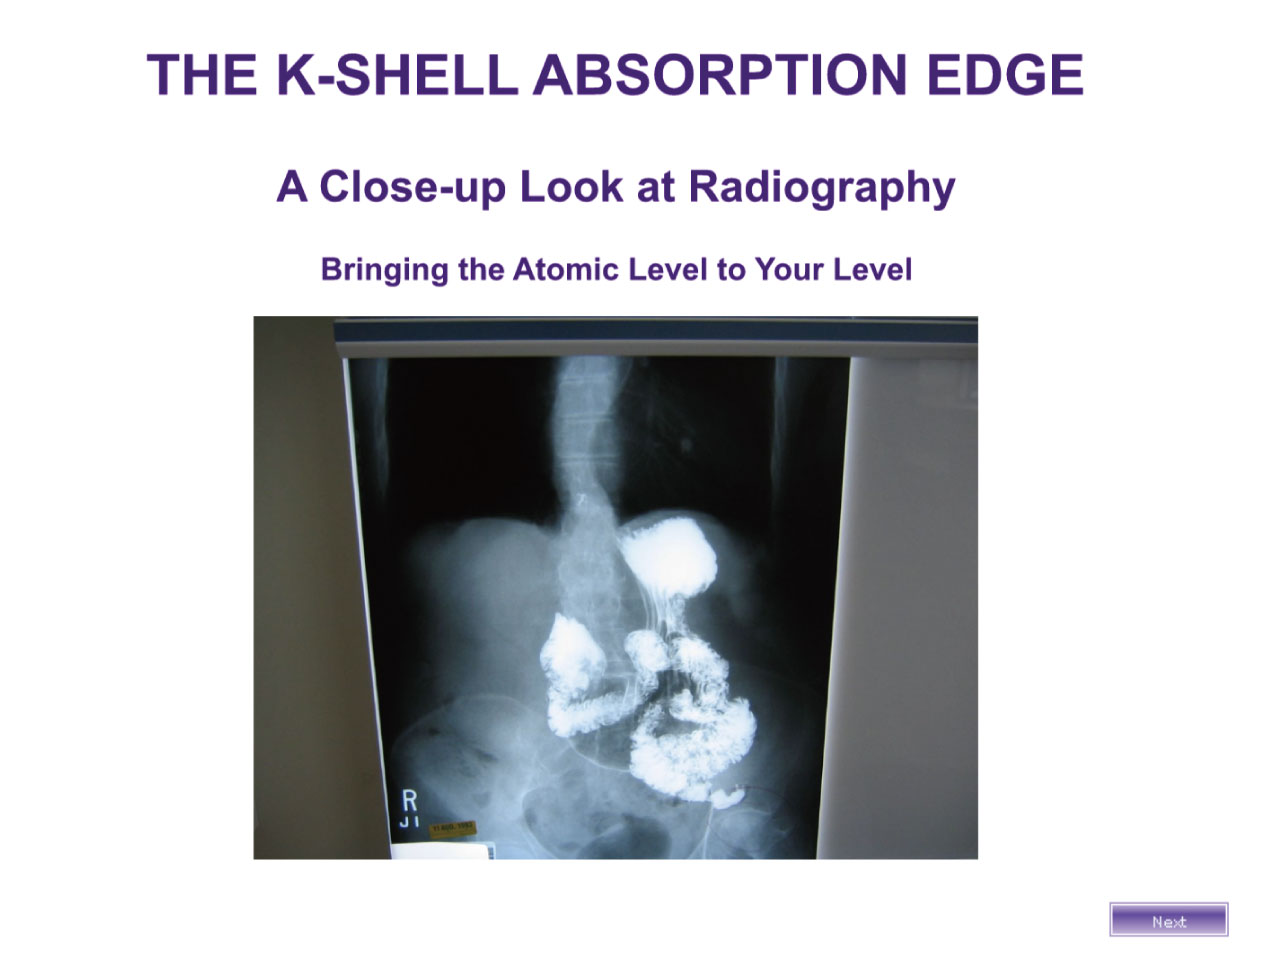 The K-Shell Absorption Edge: A Close-Up Look at Radiography